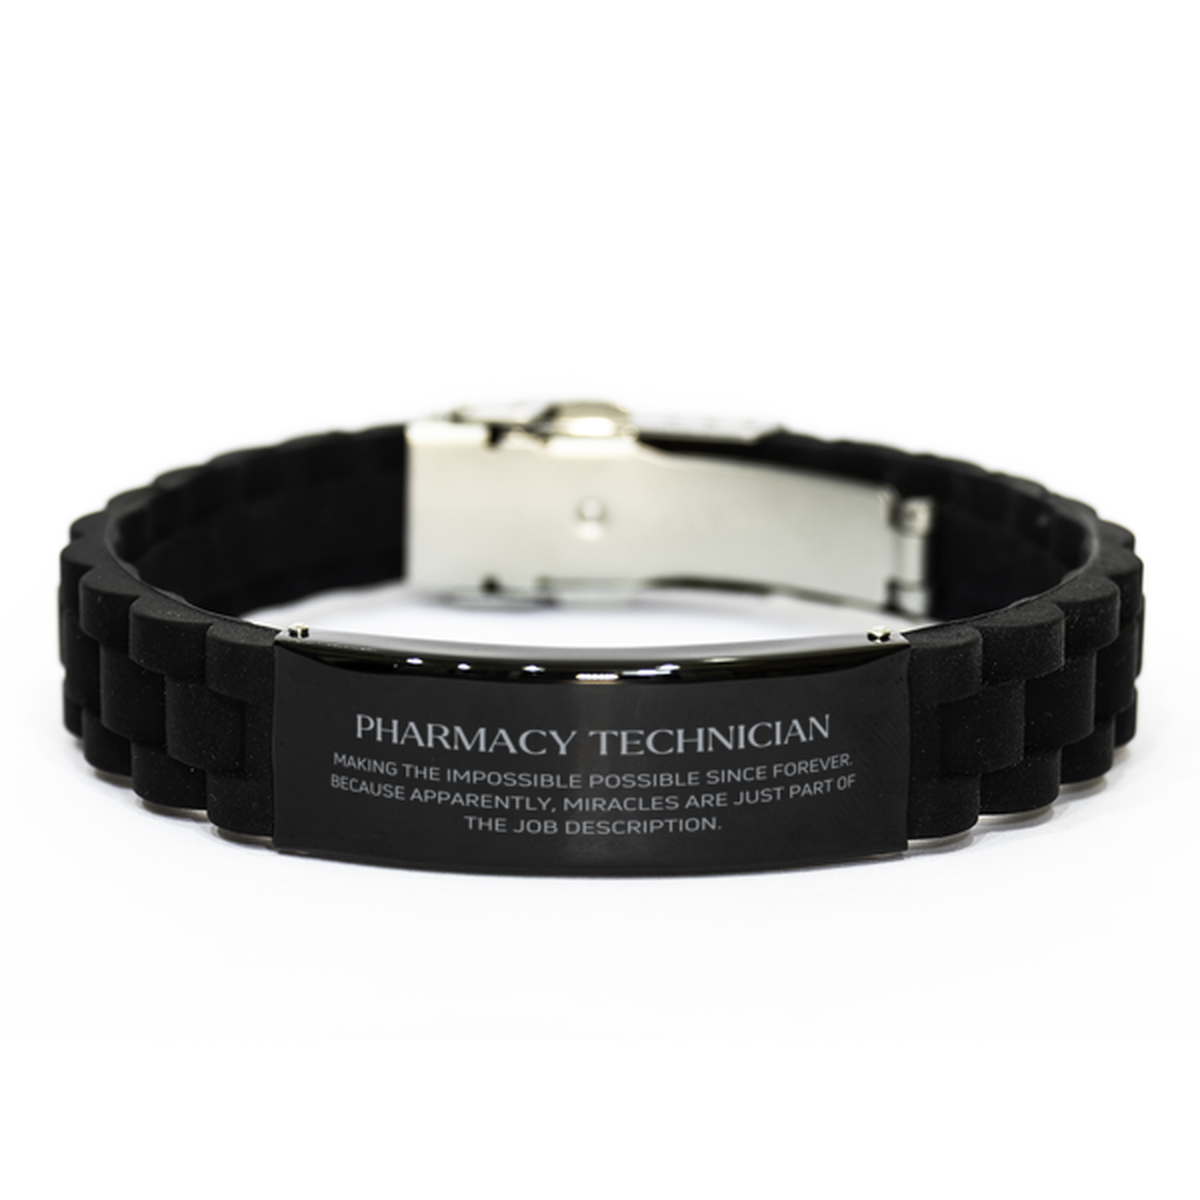 Funny Pharmacy Technician Gifts, Miracles are just part of the job description, Inspirational Birthday Black Glidelock Clasp Bracelet For Pharmacy Technician, Men, Women, Coworkers, Friends, Boss